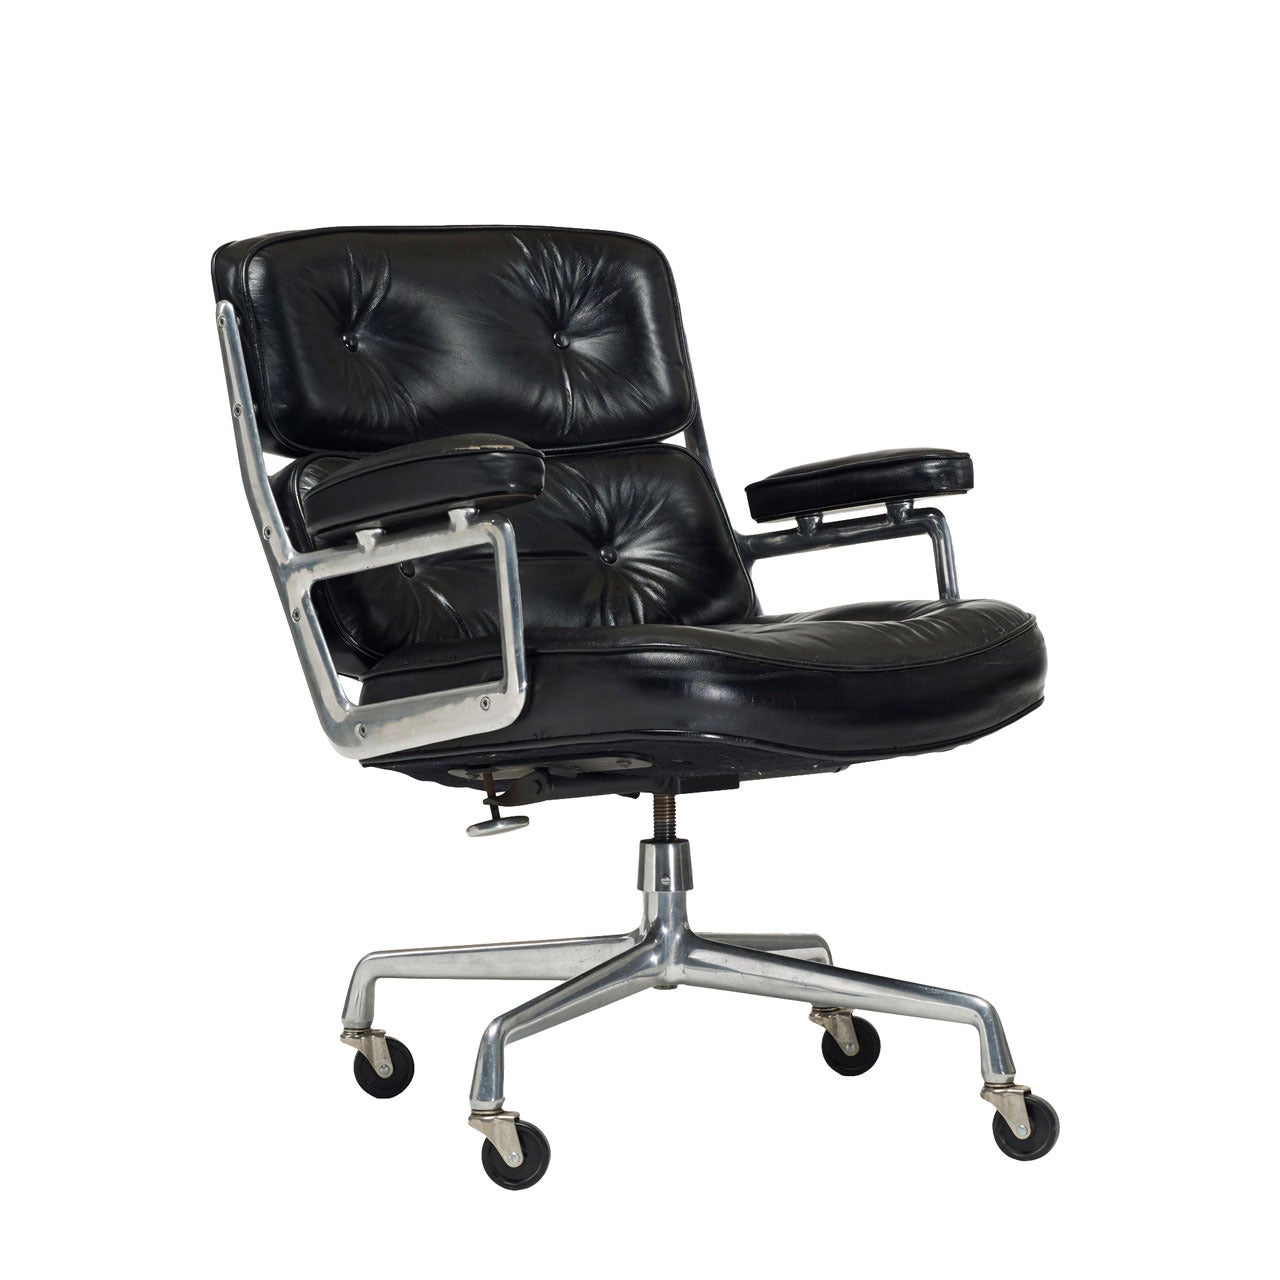 Time Life Executive Chair by Charles & Ray Eames for Herman Miller